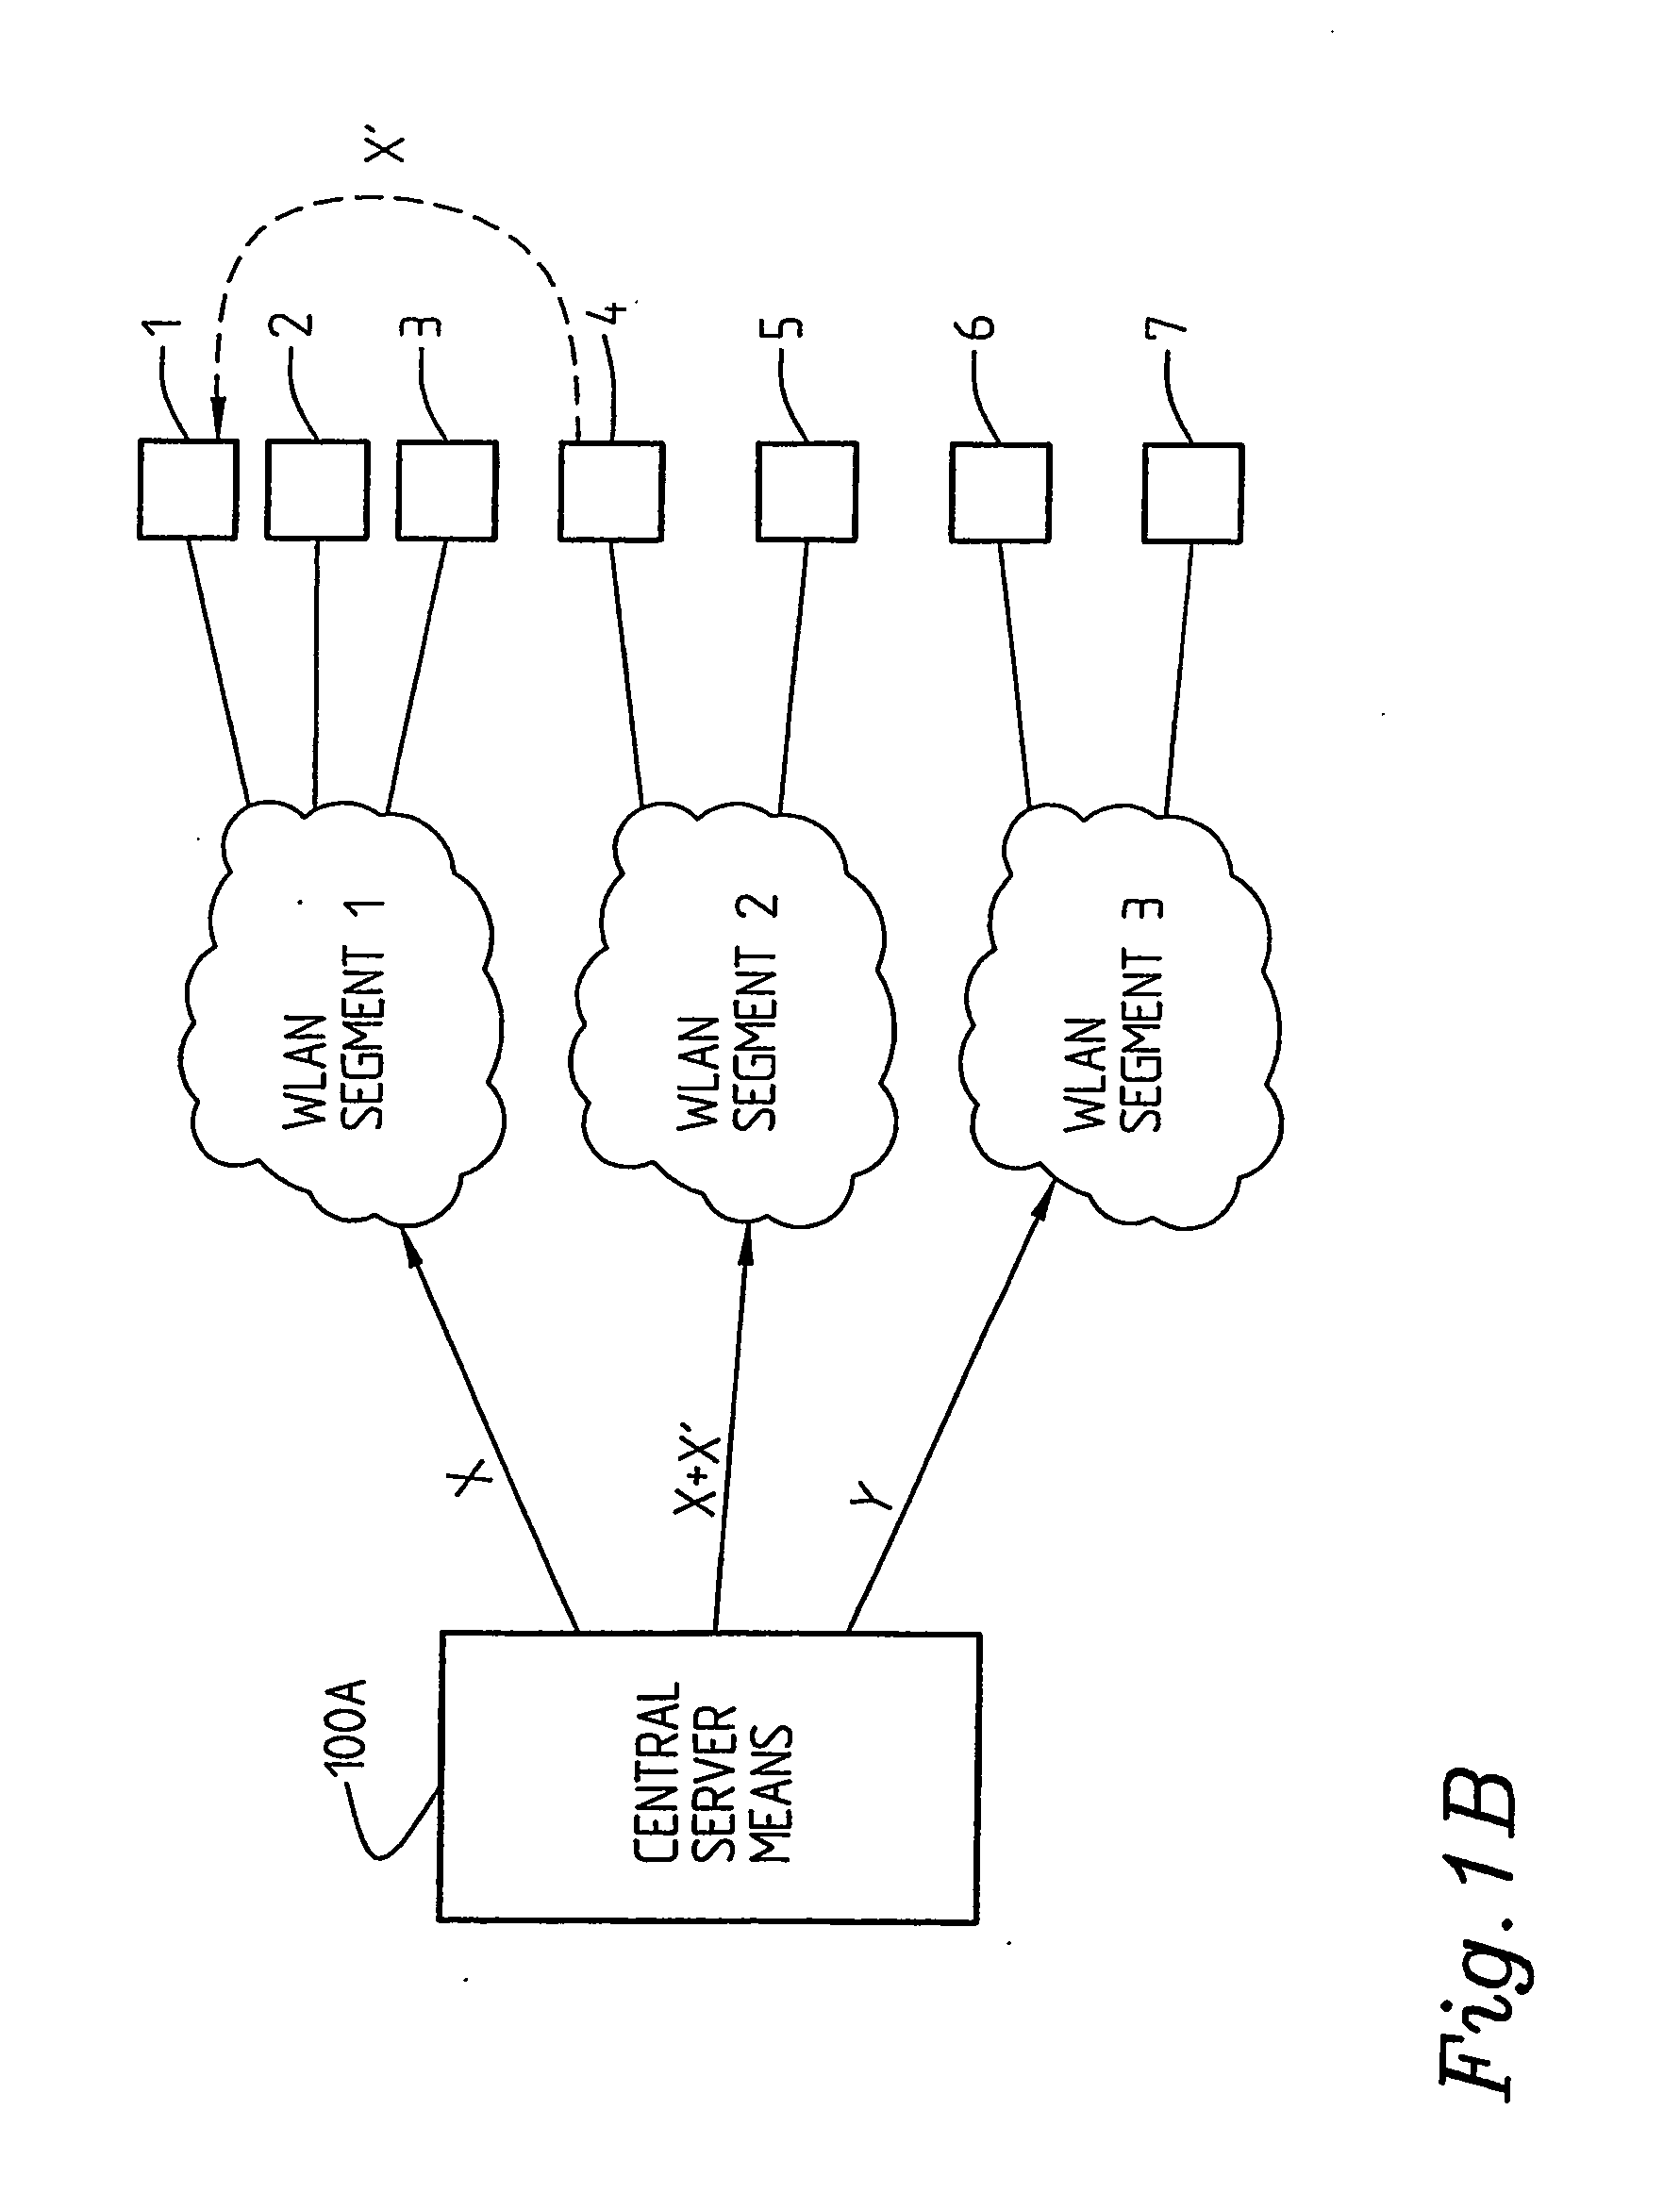 System and a method relating to communication of data